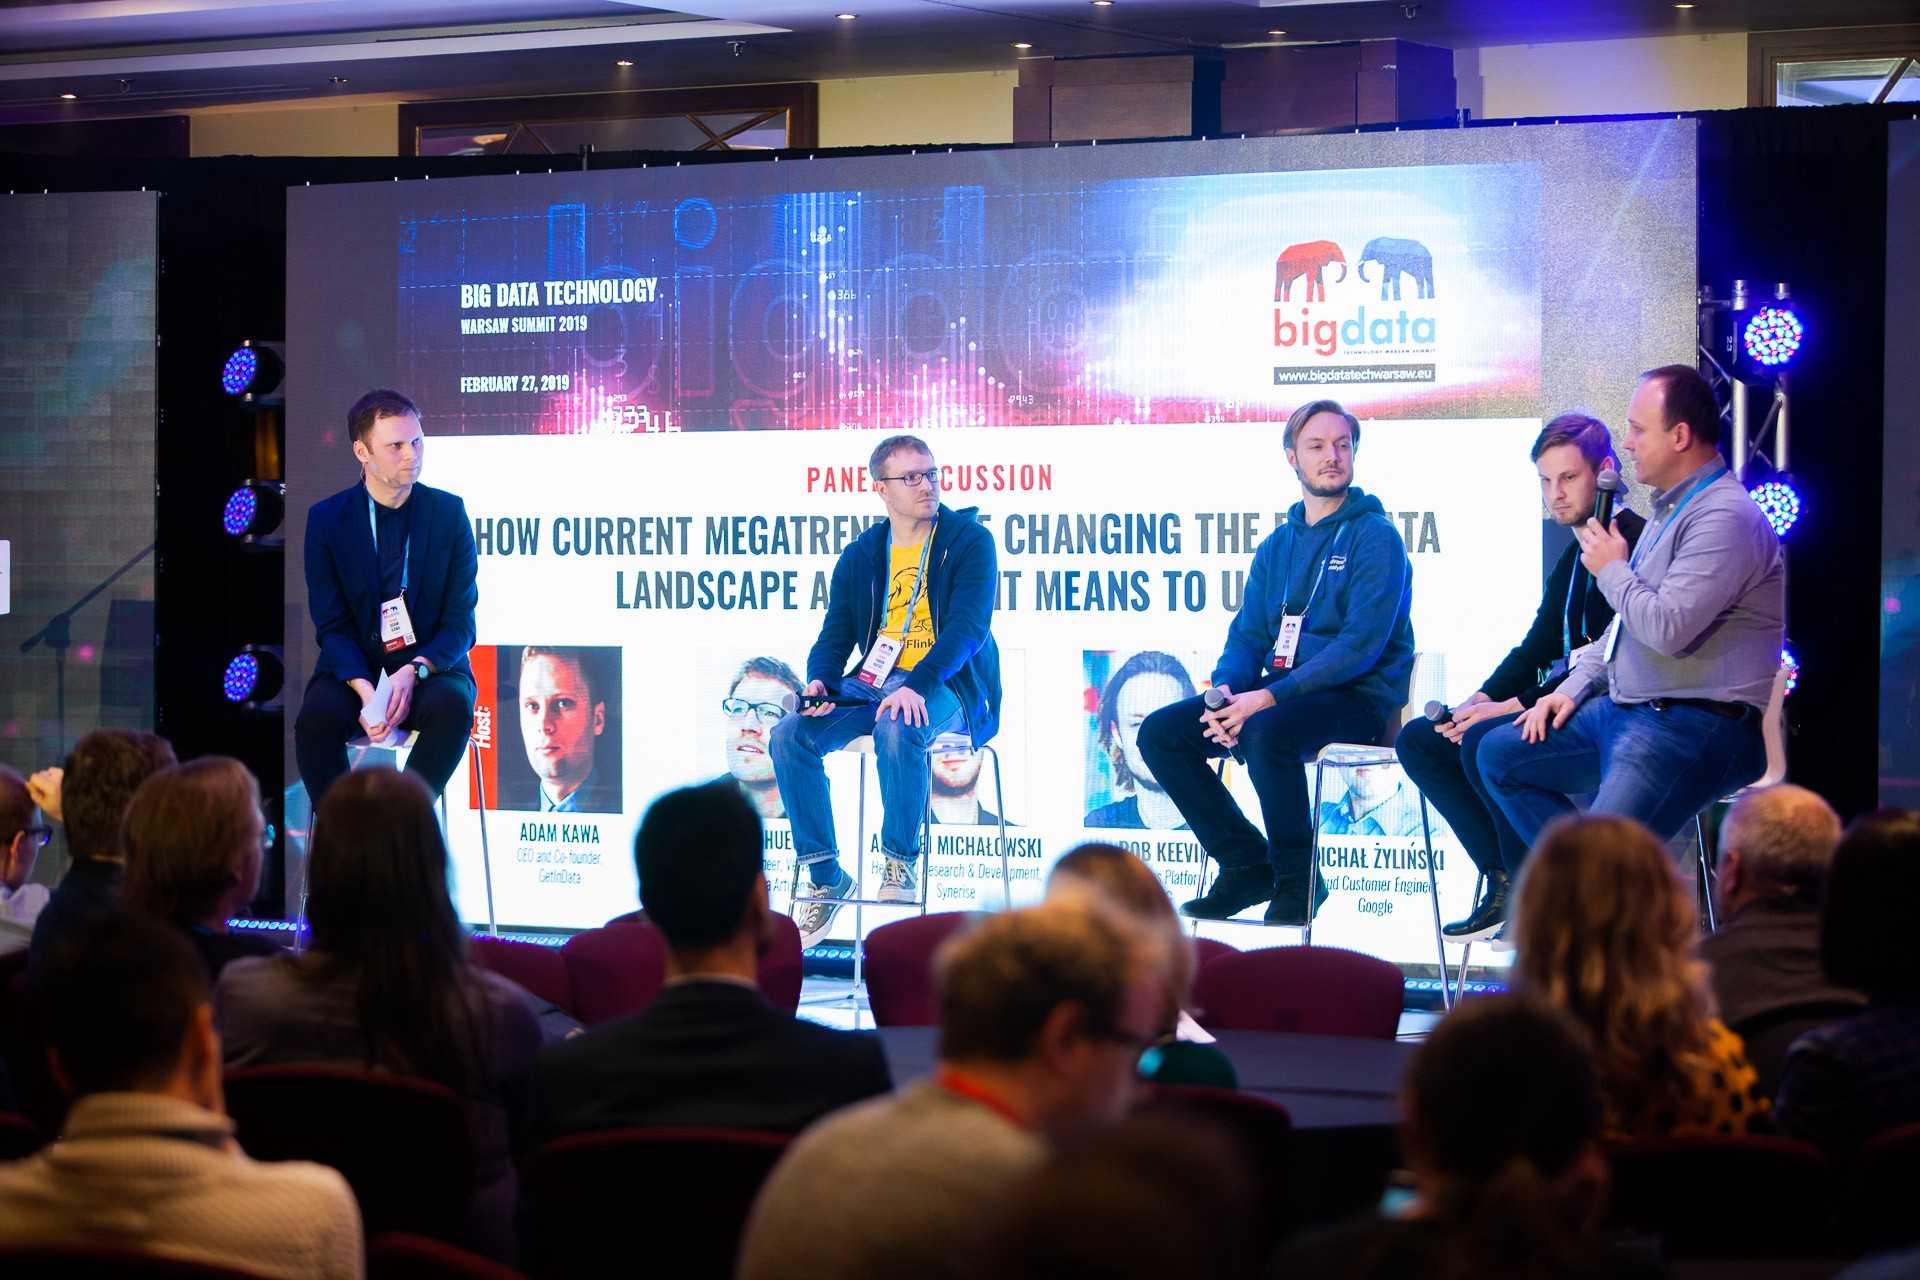 Panel discussion “How current mega-trends are changing the Big Data landscape and what it means to us” at Big Data Tech Warsaw in 2019.